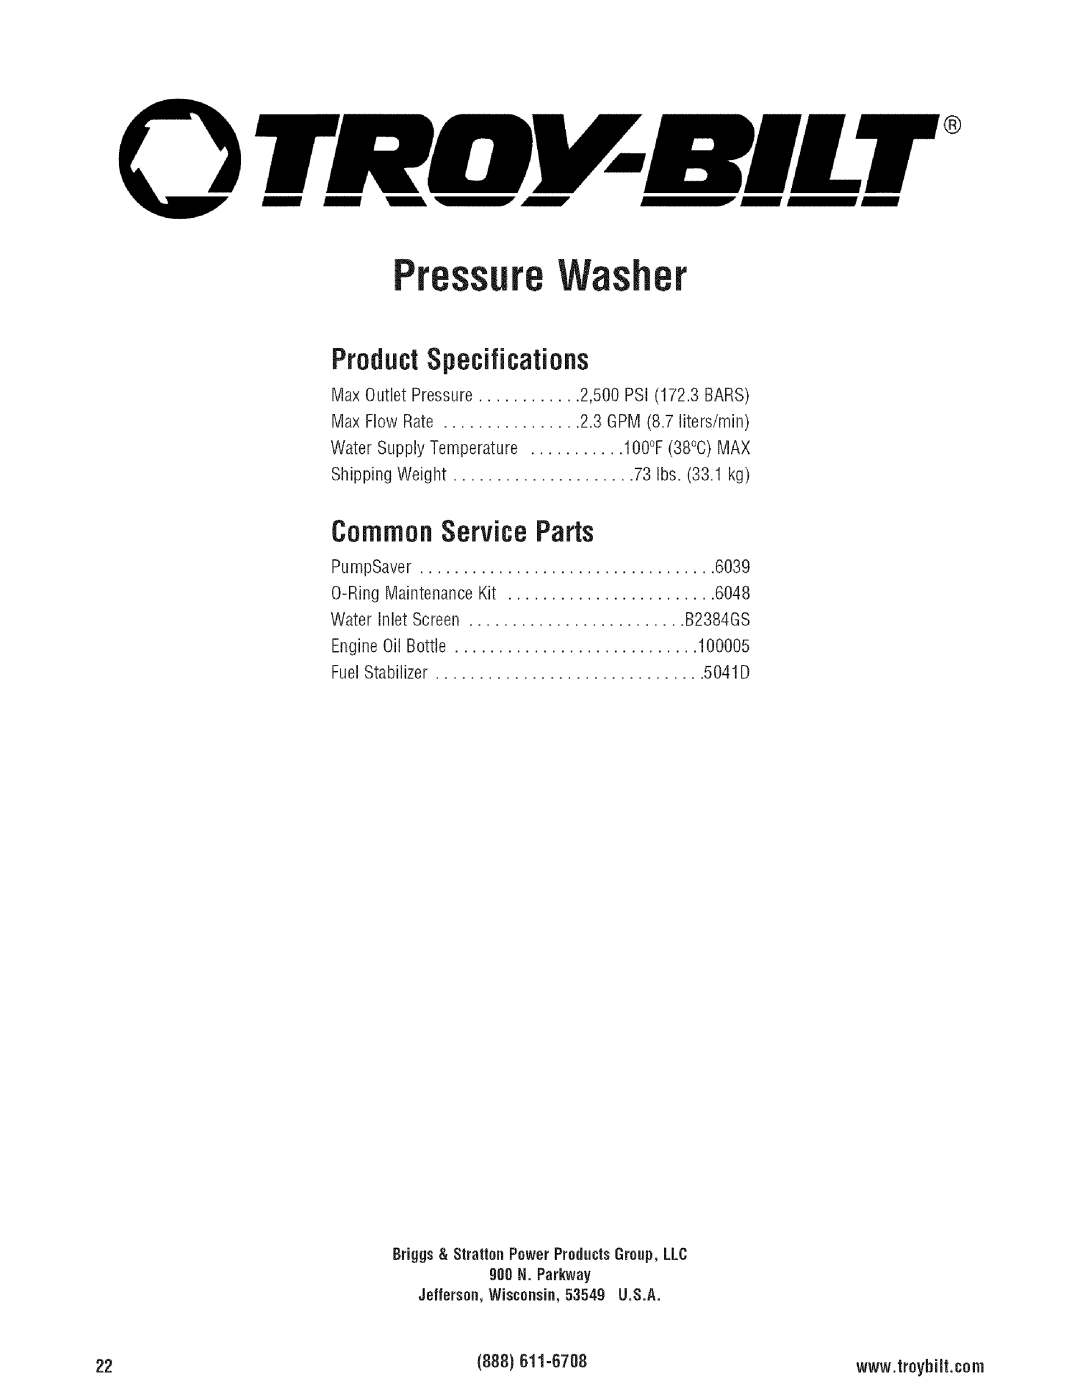 Troy-Bilt 203779GS manual Product Specifications, CommonService Parts, PrssSIJr8, GPM 8.7 liters/min 